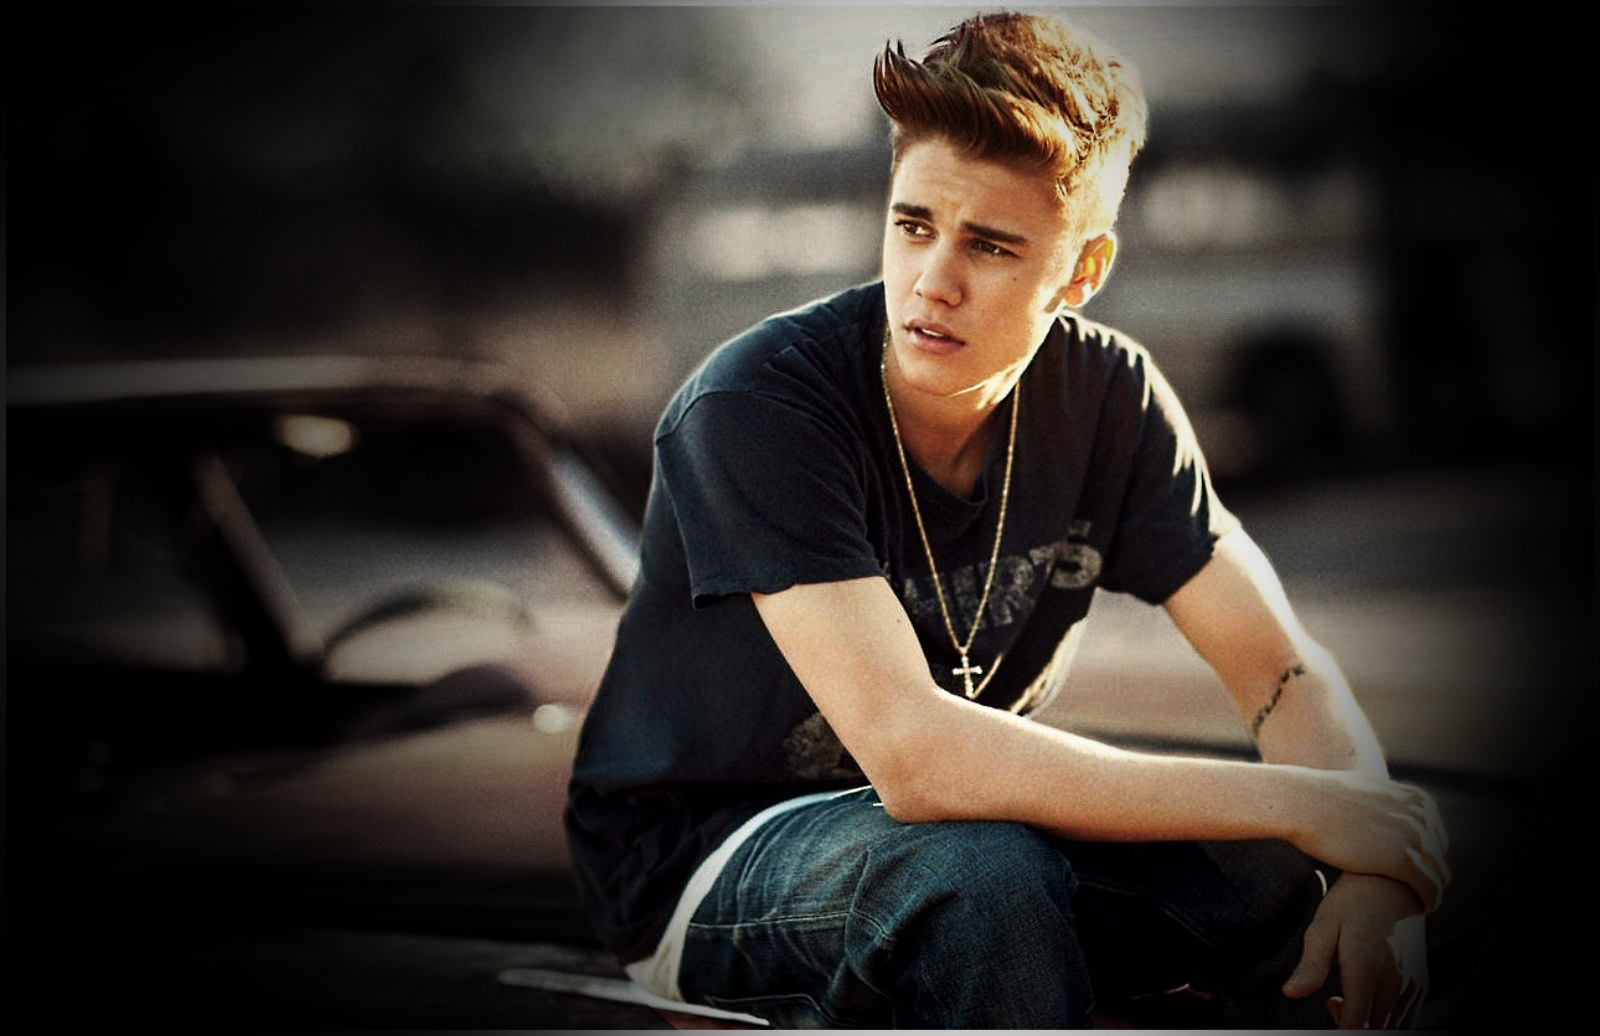 Justin Bieber Wallpapers 2015 Full HD Pictures